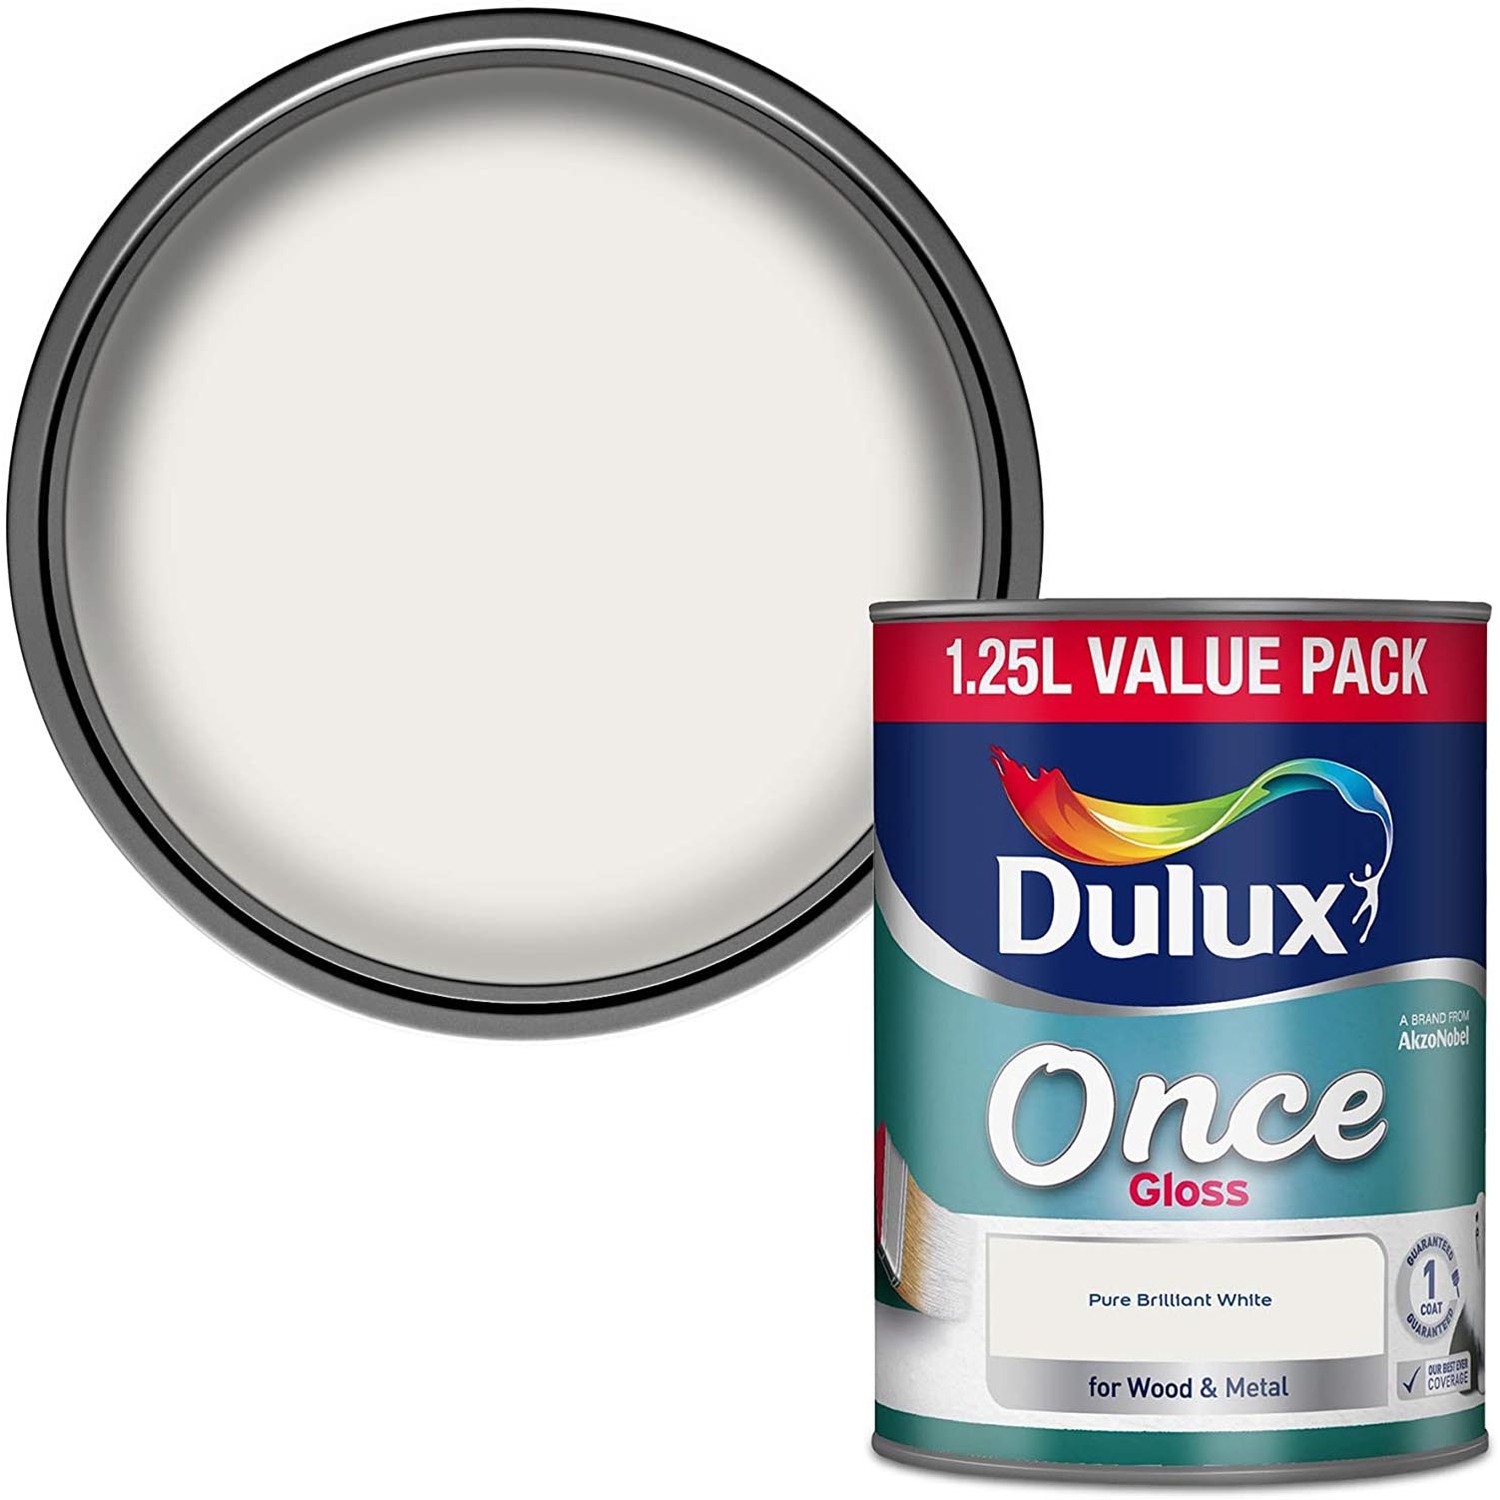 Dulux Once Wood and Metal Pure Brilliant White Gloss Paint 1.25L Image 1